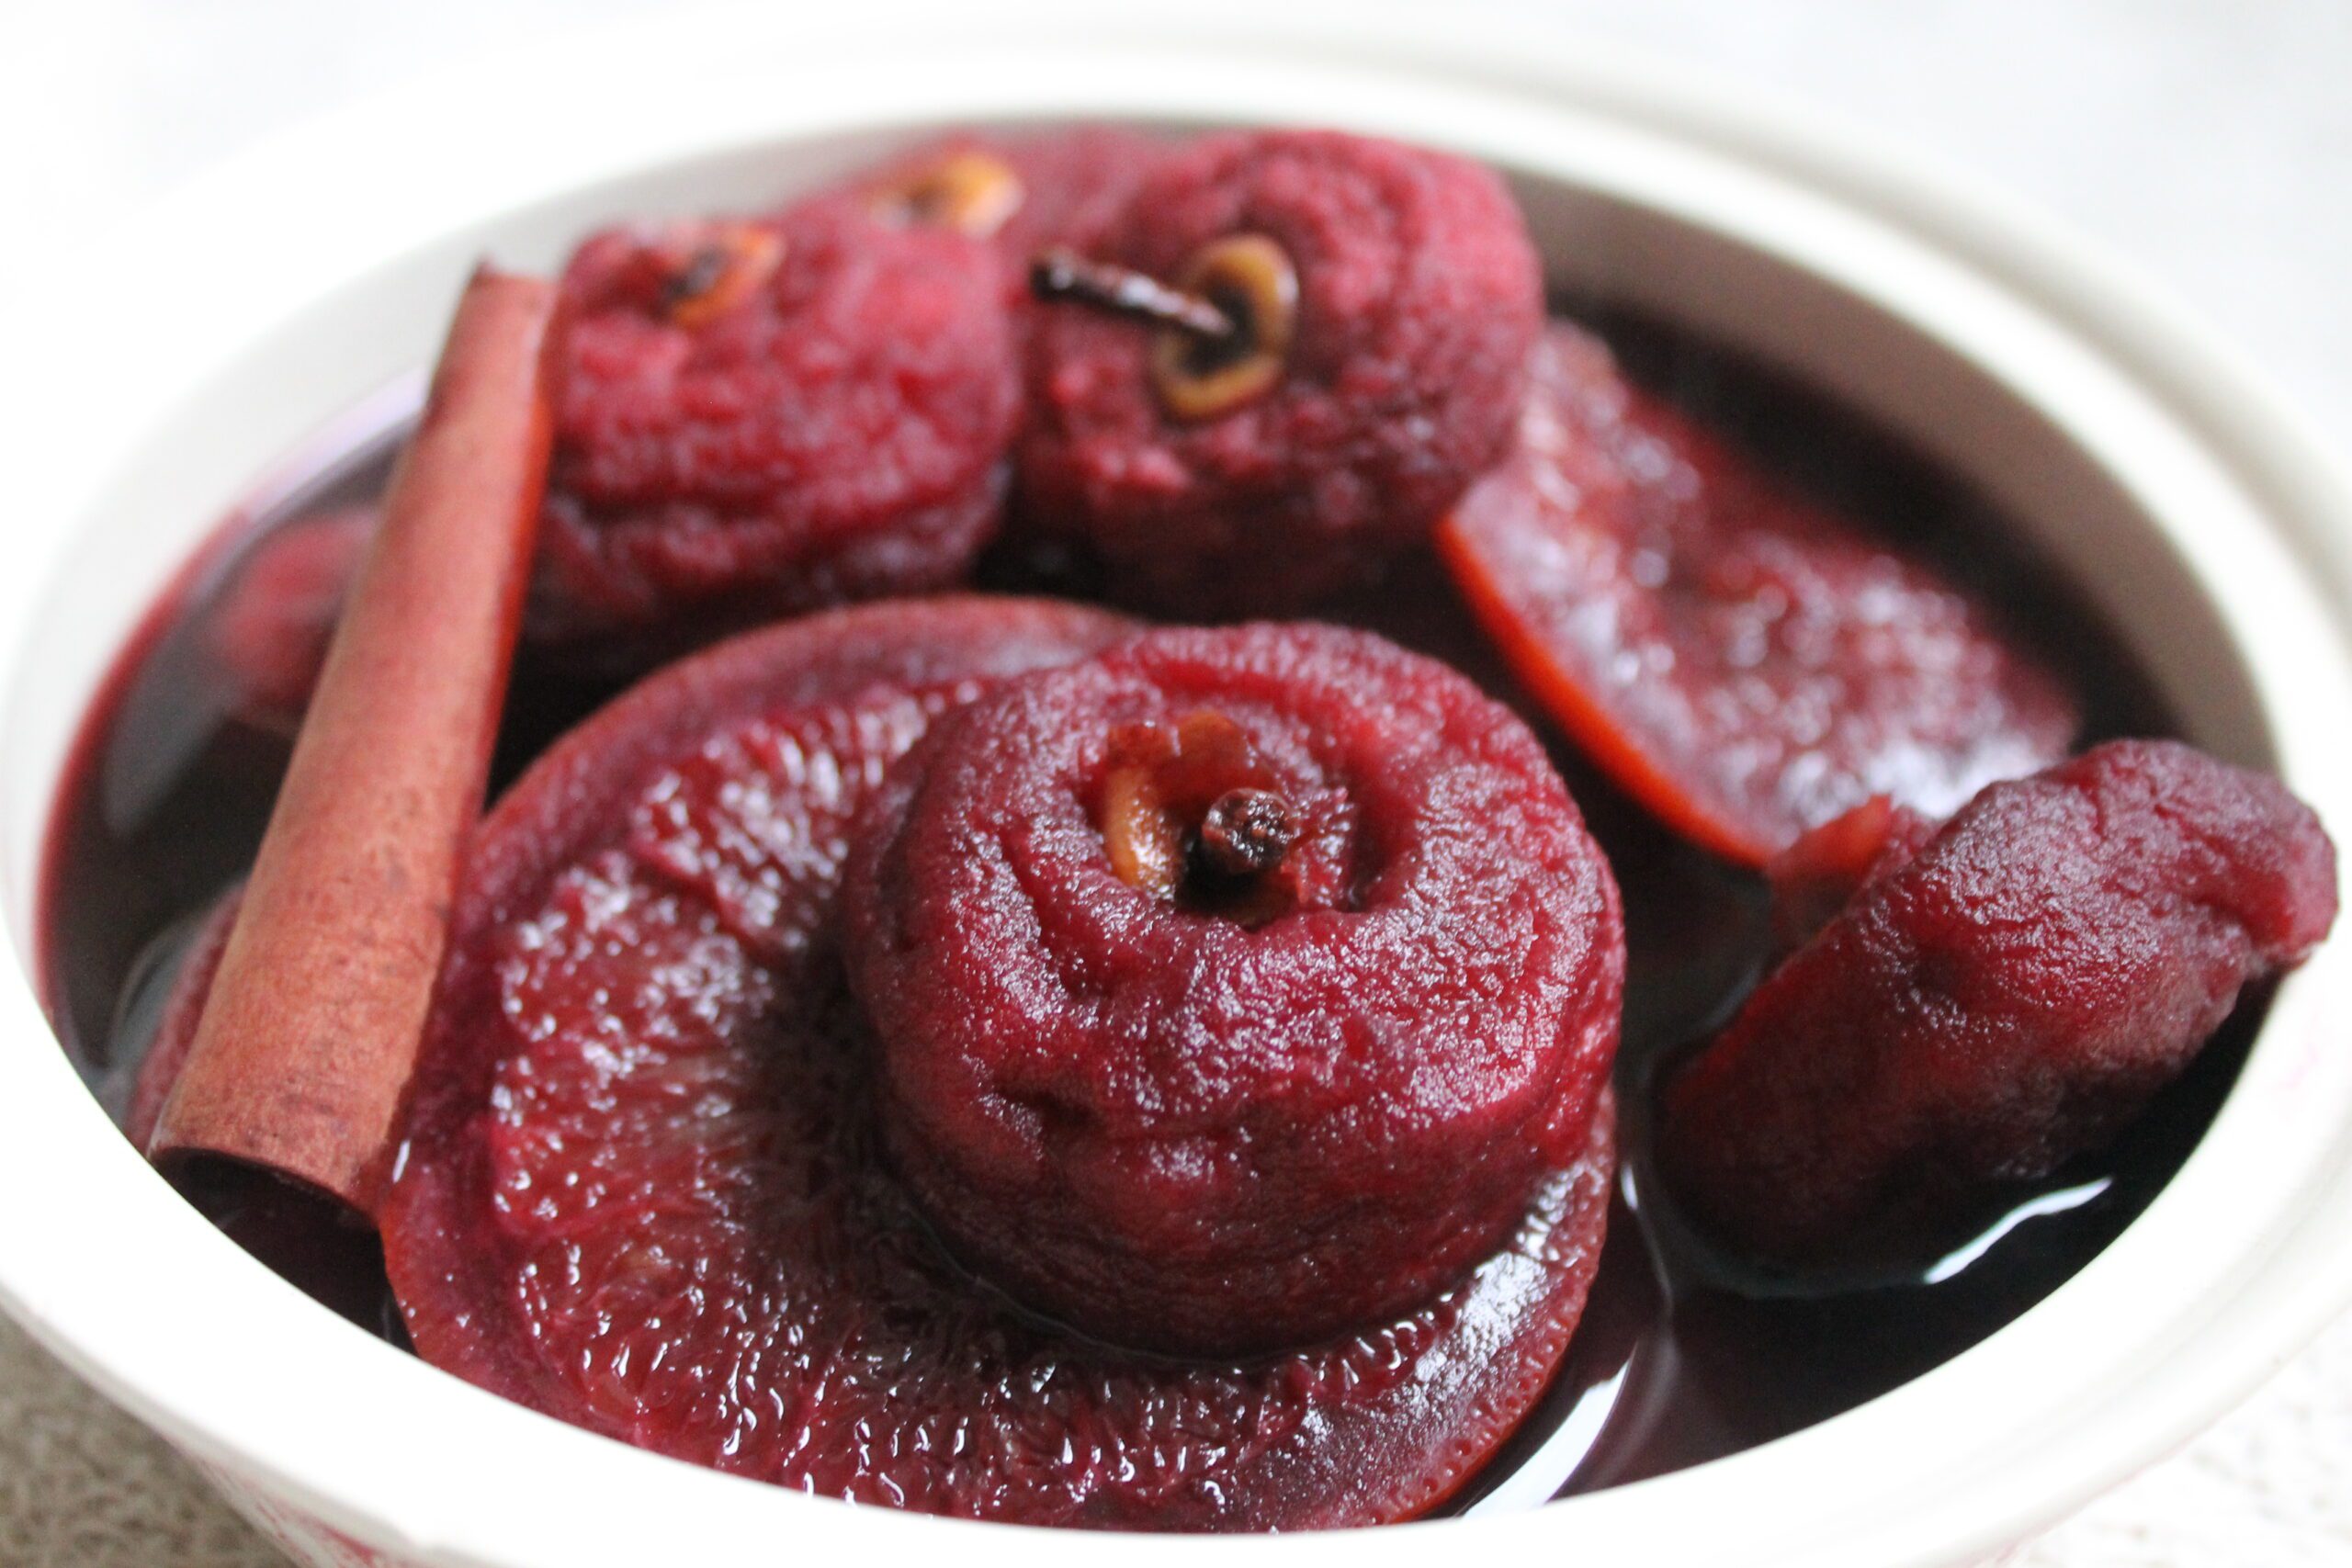 bowl of dried apples soaked in red wine so they are blood red in colour, and studded with cinnamon sticks and cloves